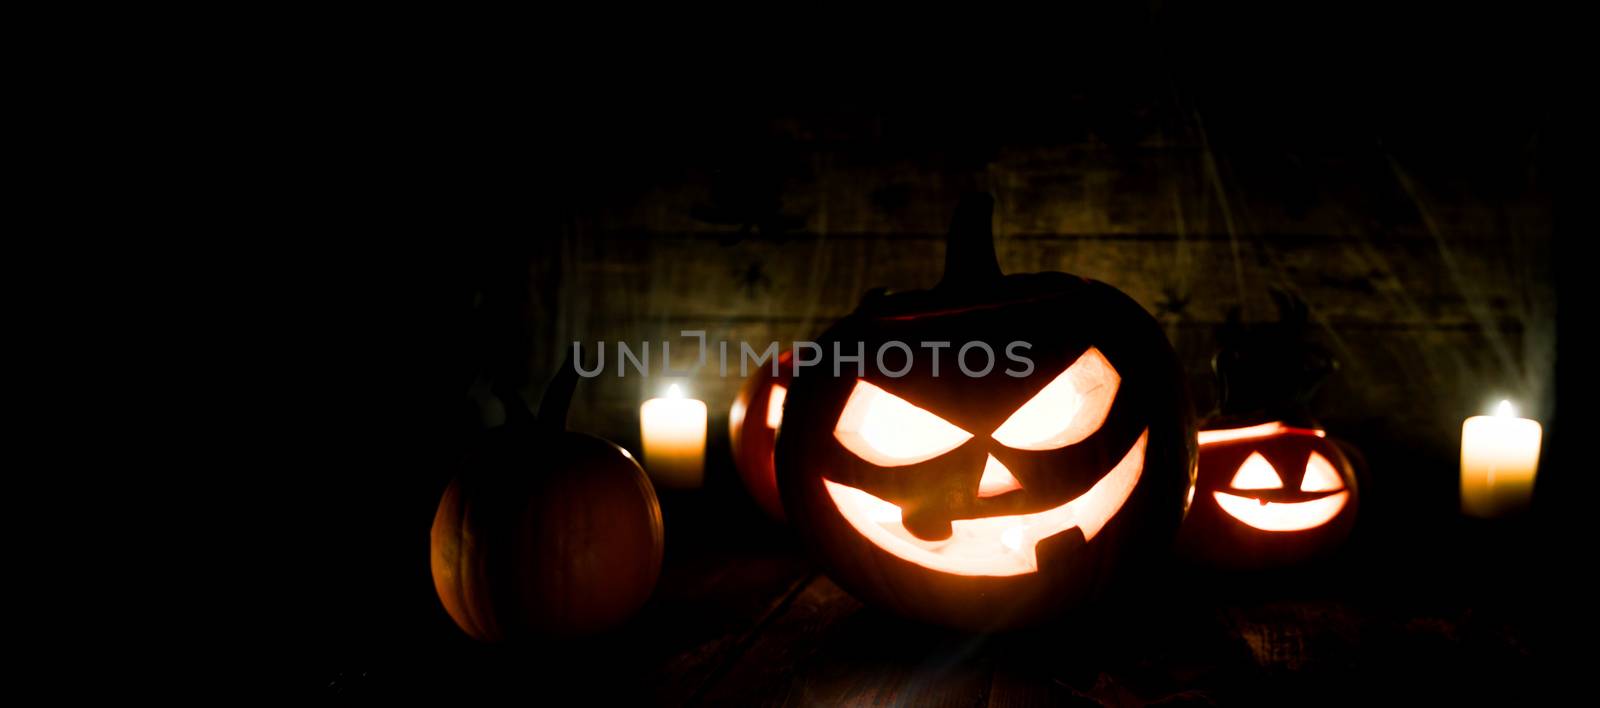 Jack O Lantern Halloween pumpkins, spiders on web and burning candles